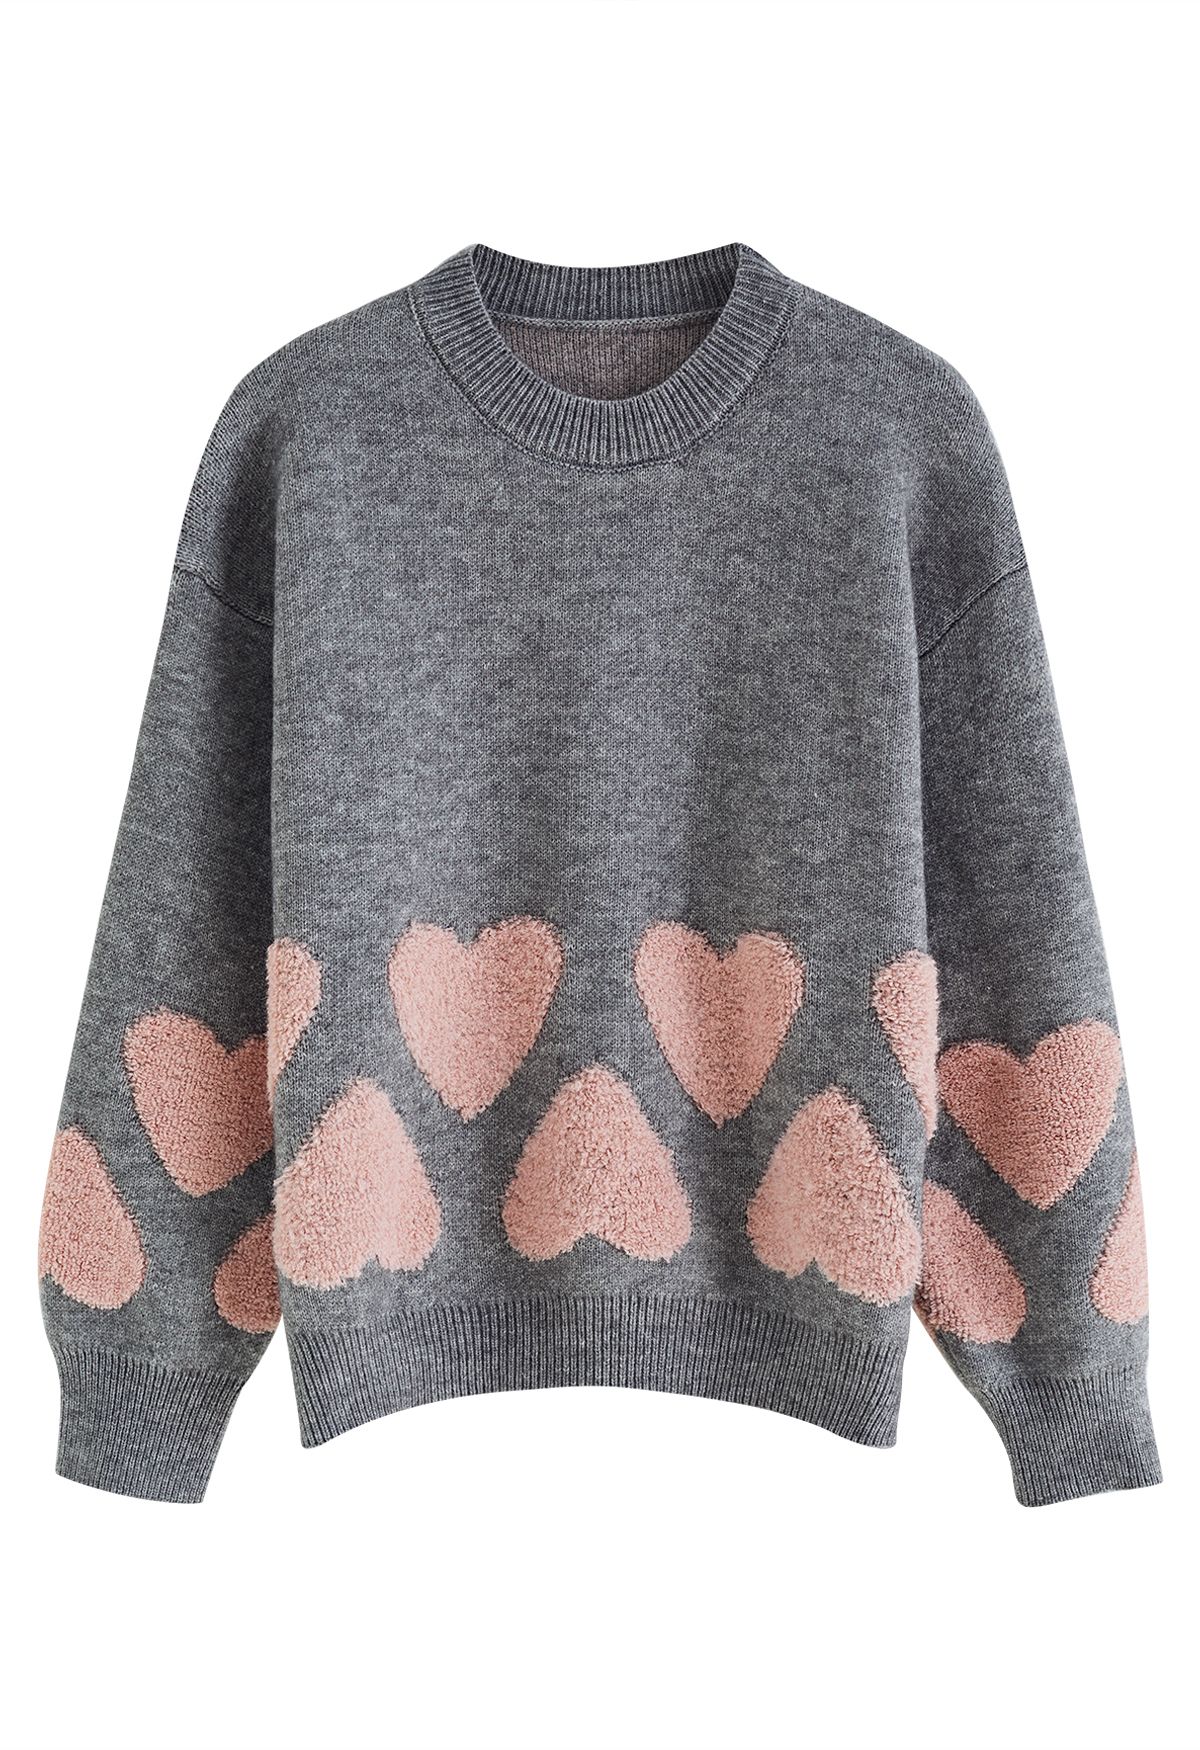 Tender Fuzzy Heart Jacquard Knit Sweater in Grey - Retro, Indie